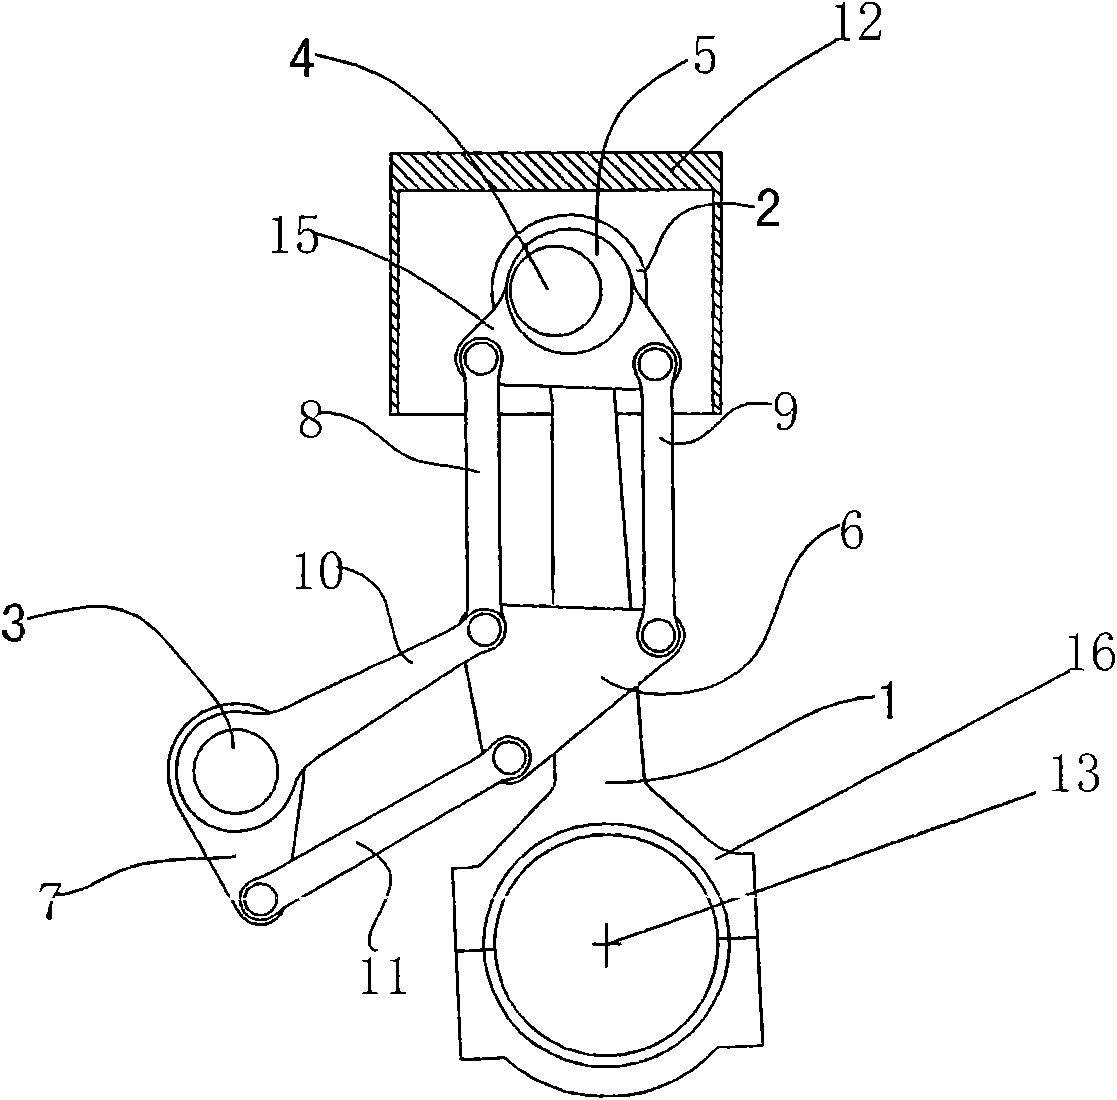 Variable compression ratio device of automobile engine